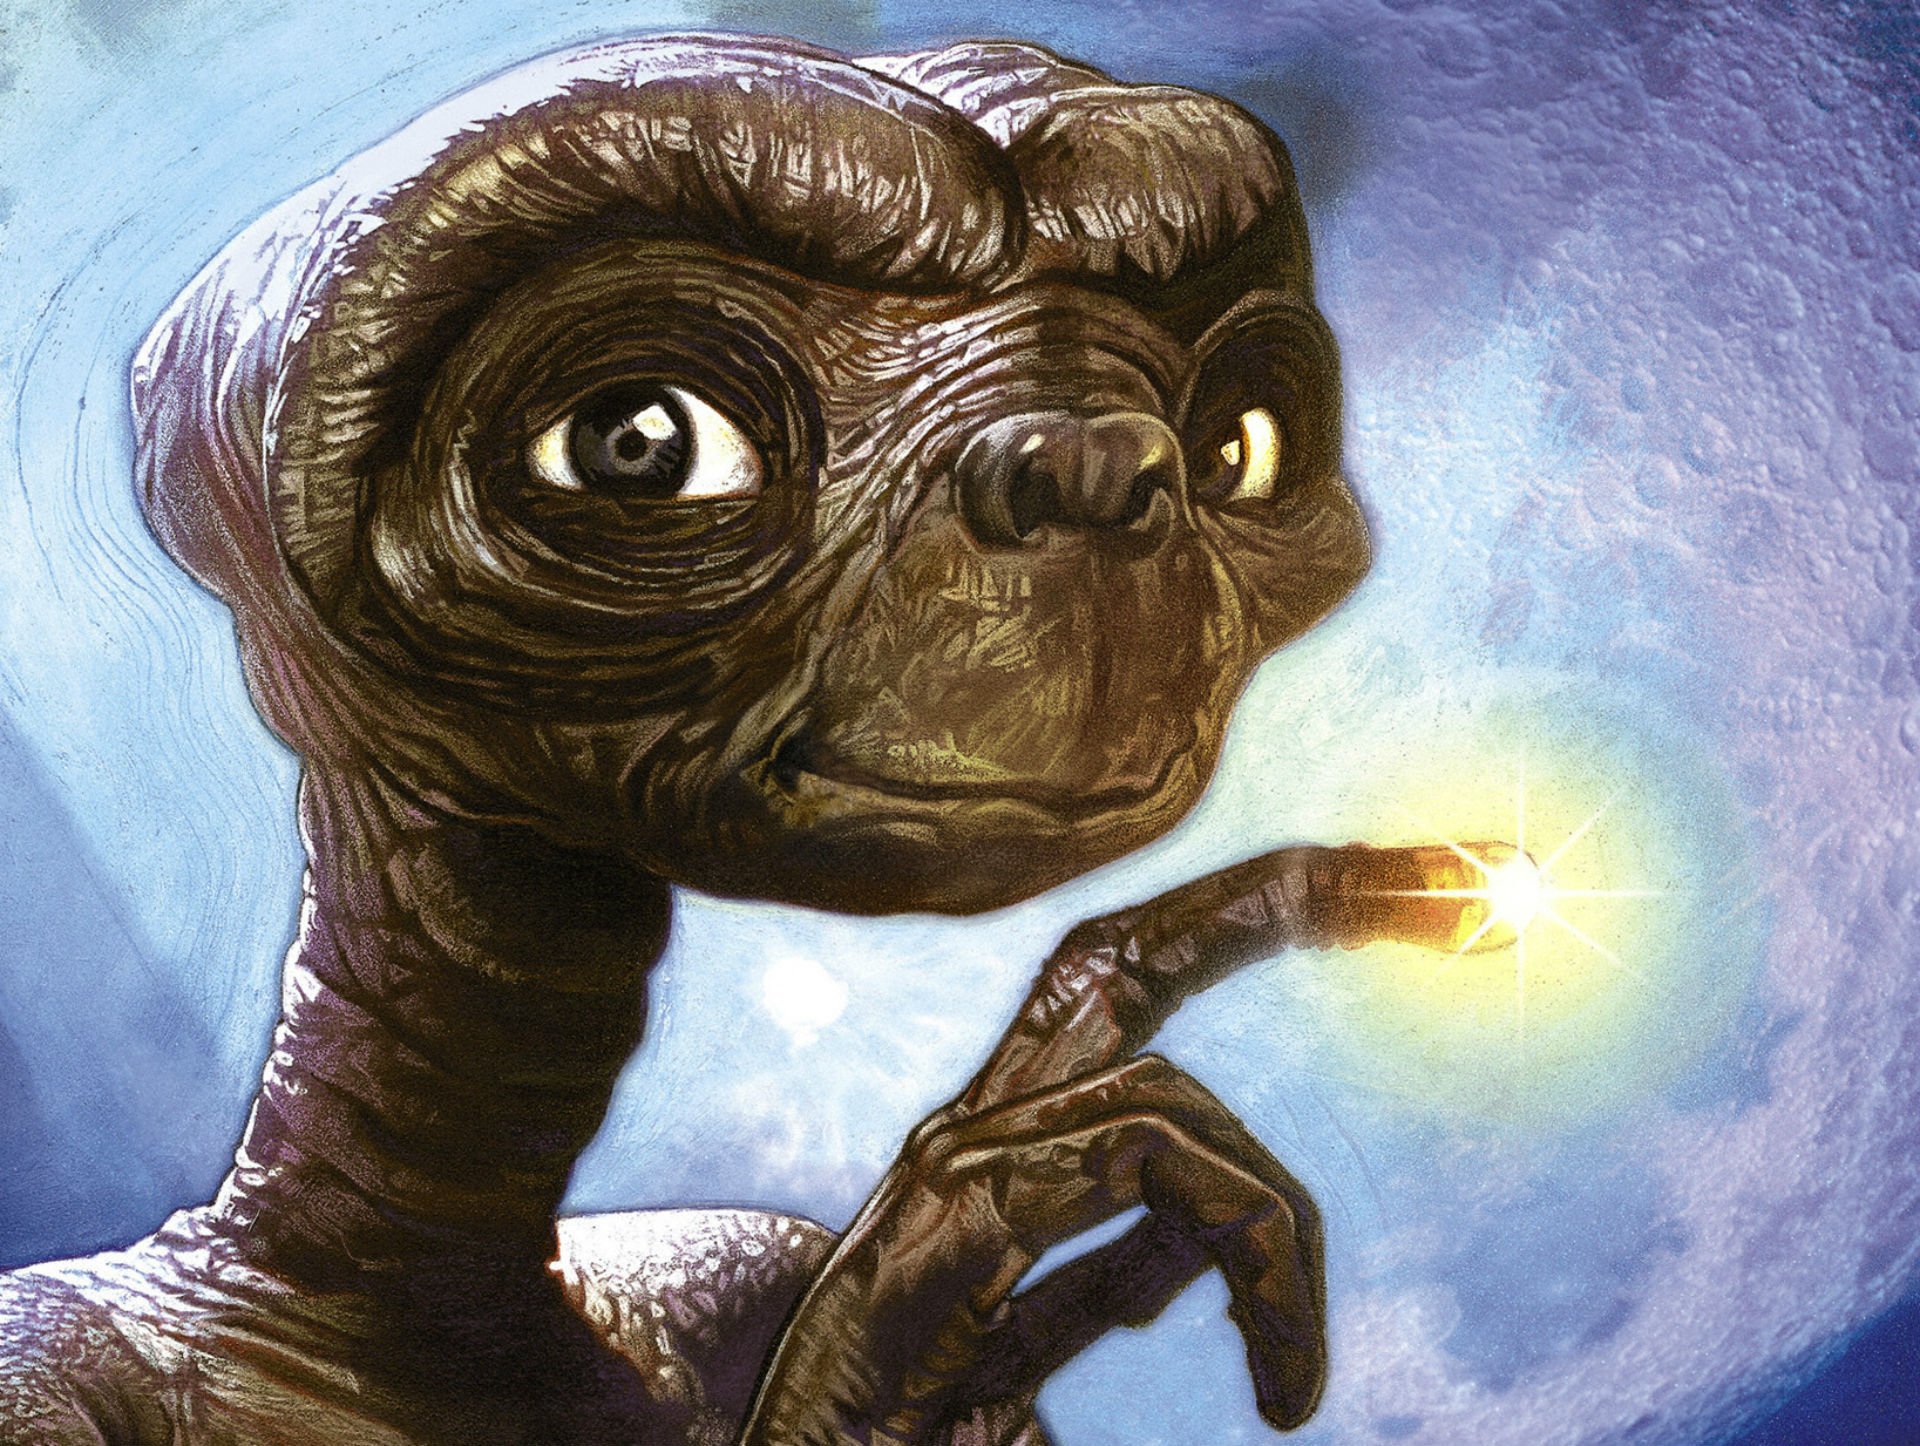 E.T. the Extra-Terrestrial download the new for windows